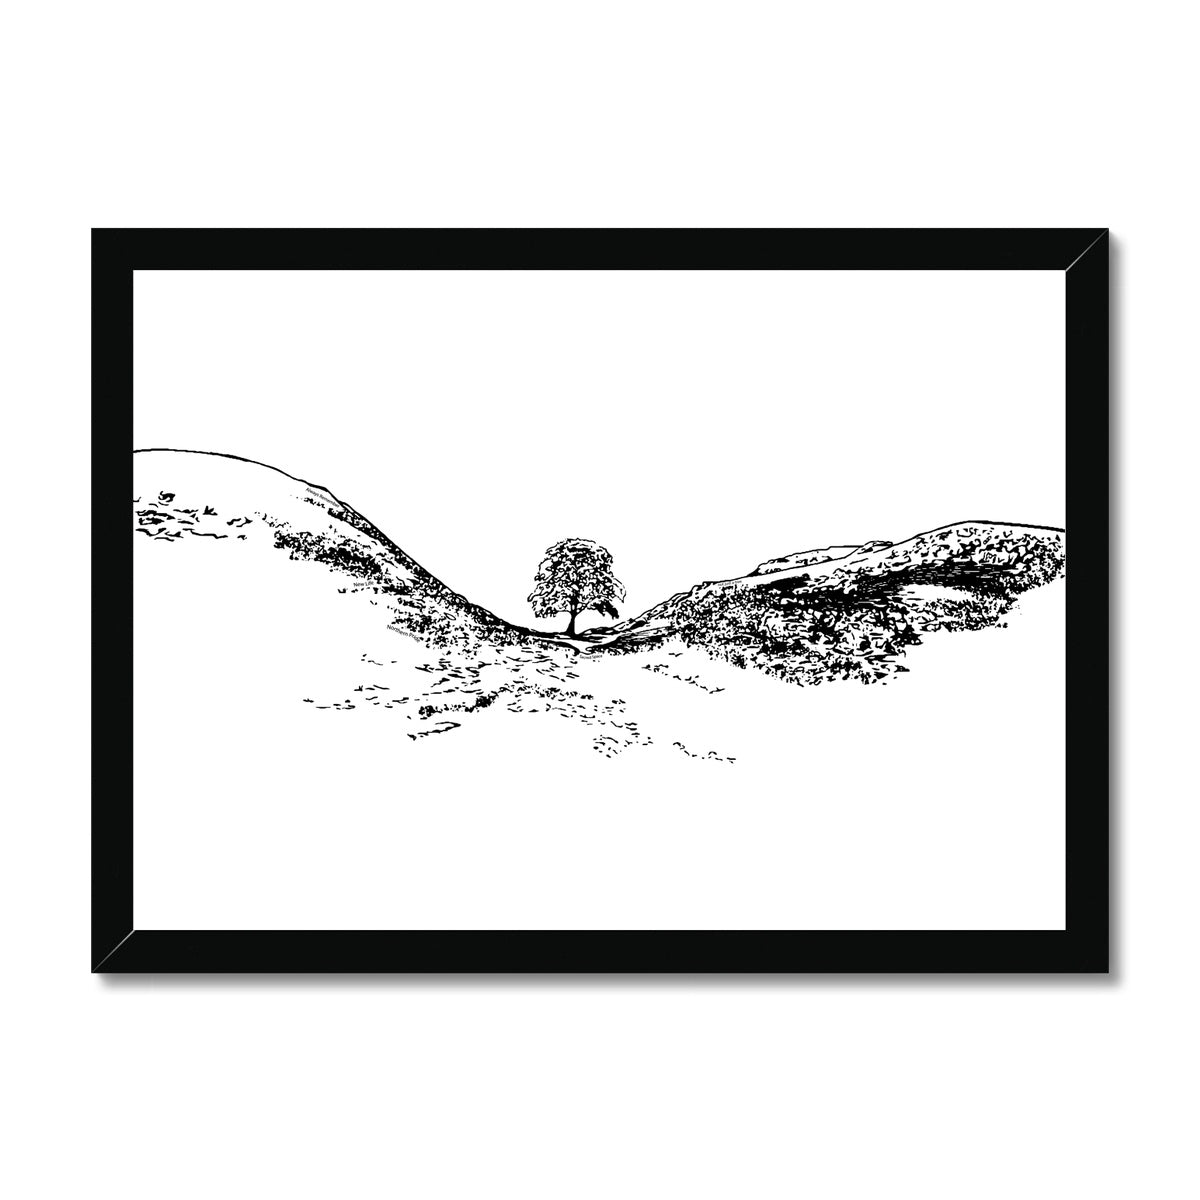 Sycamore Gap themed print featuring Sycamore Gap tree by Powder Butterfly